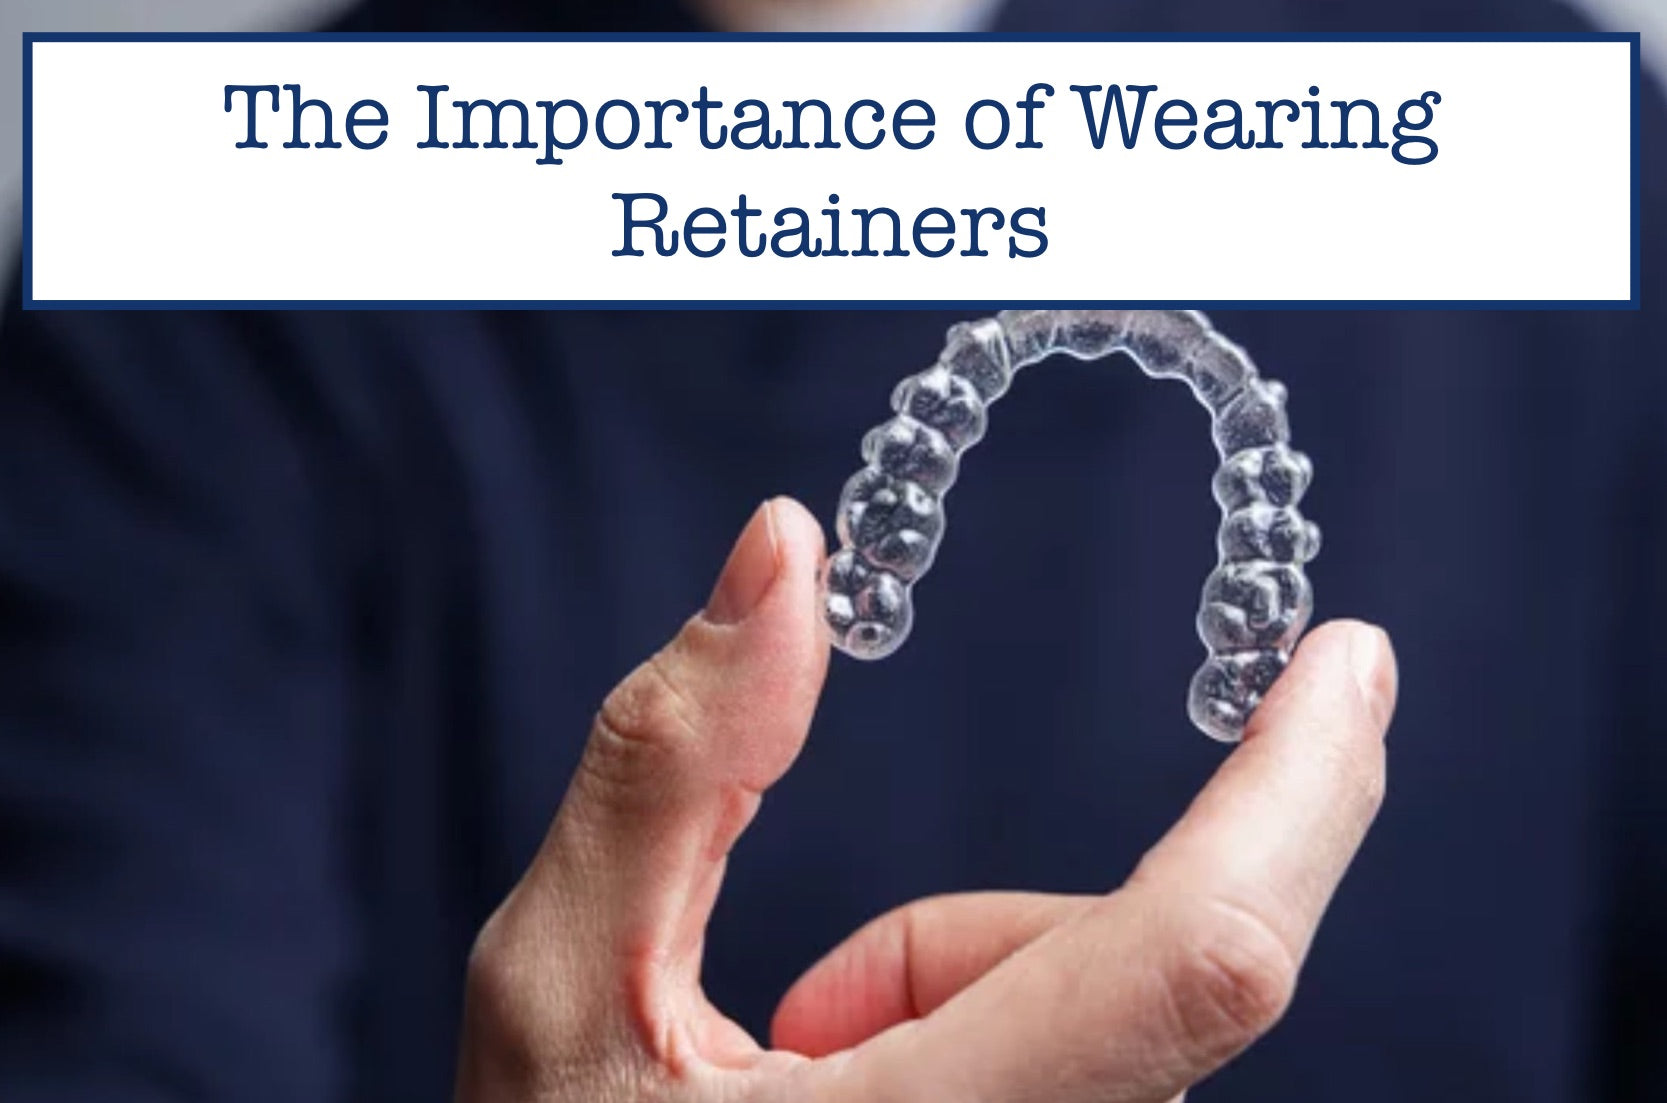 The Importance of Wearing Retainers